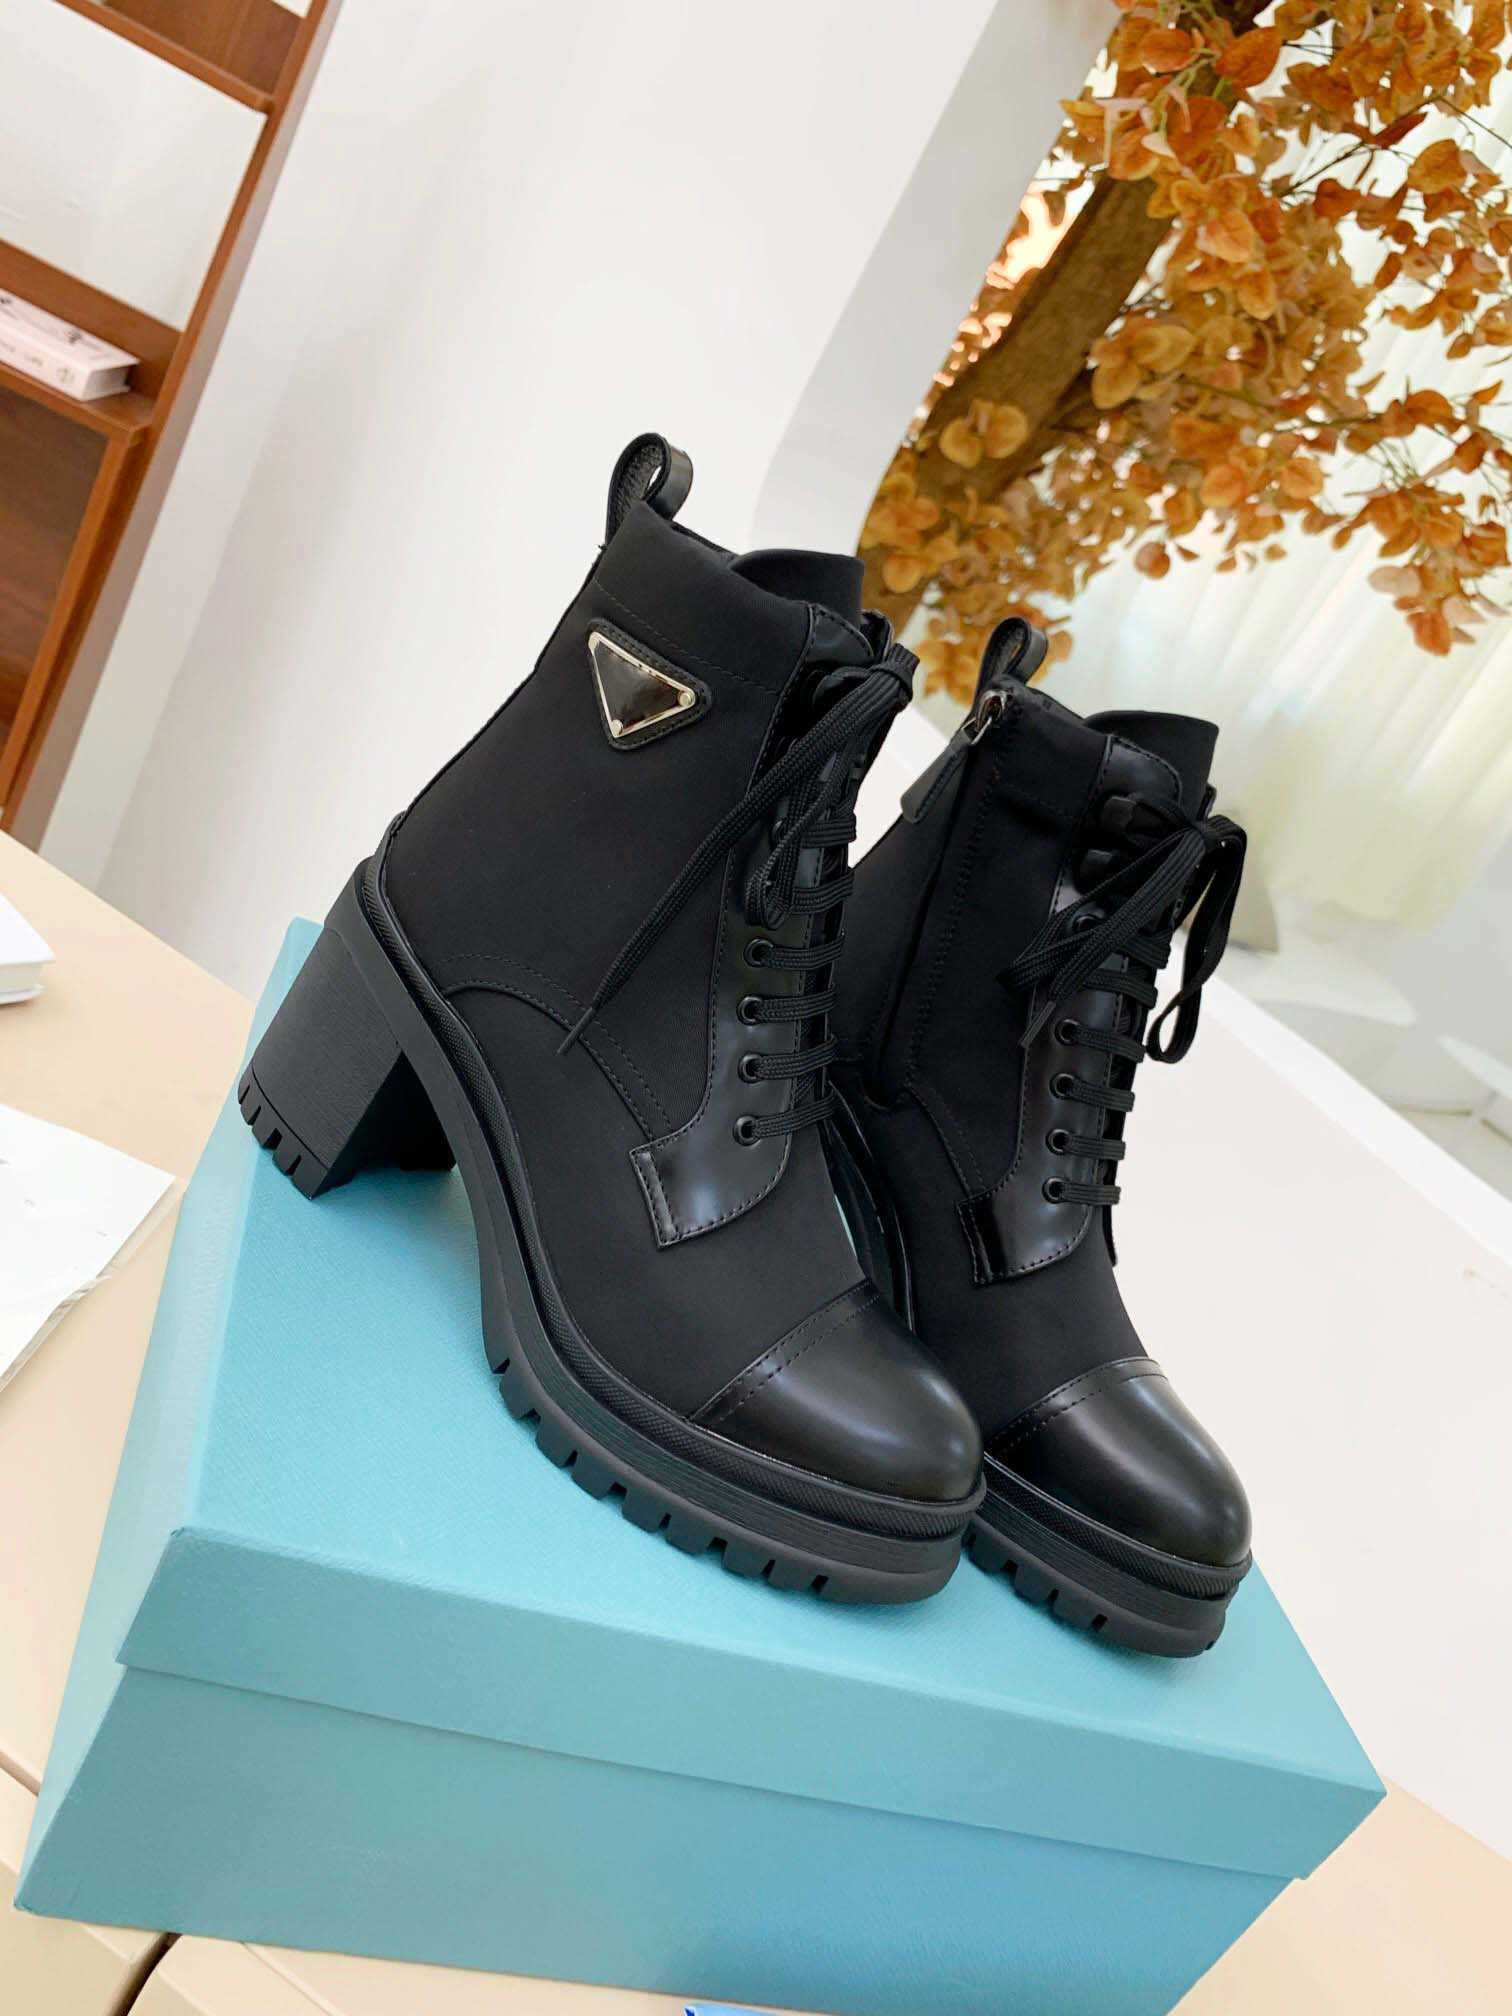 2021 Designer Leather and Nylon Ankle Boots Brushed Laced Boot Women Biker Australia Platform Heels Winter Outdoor Sneakers Size 35-41